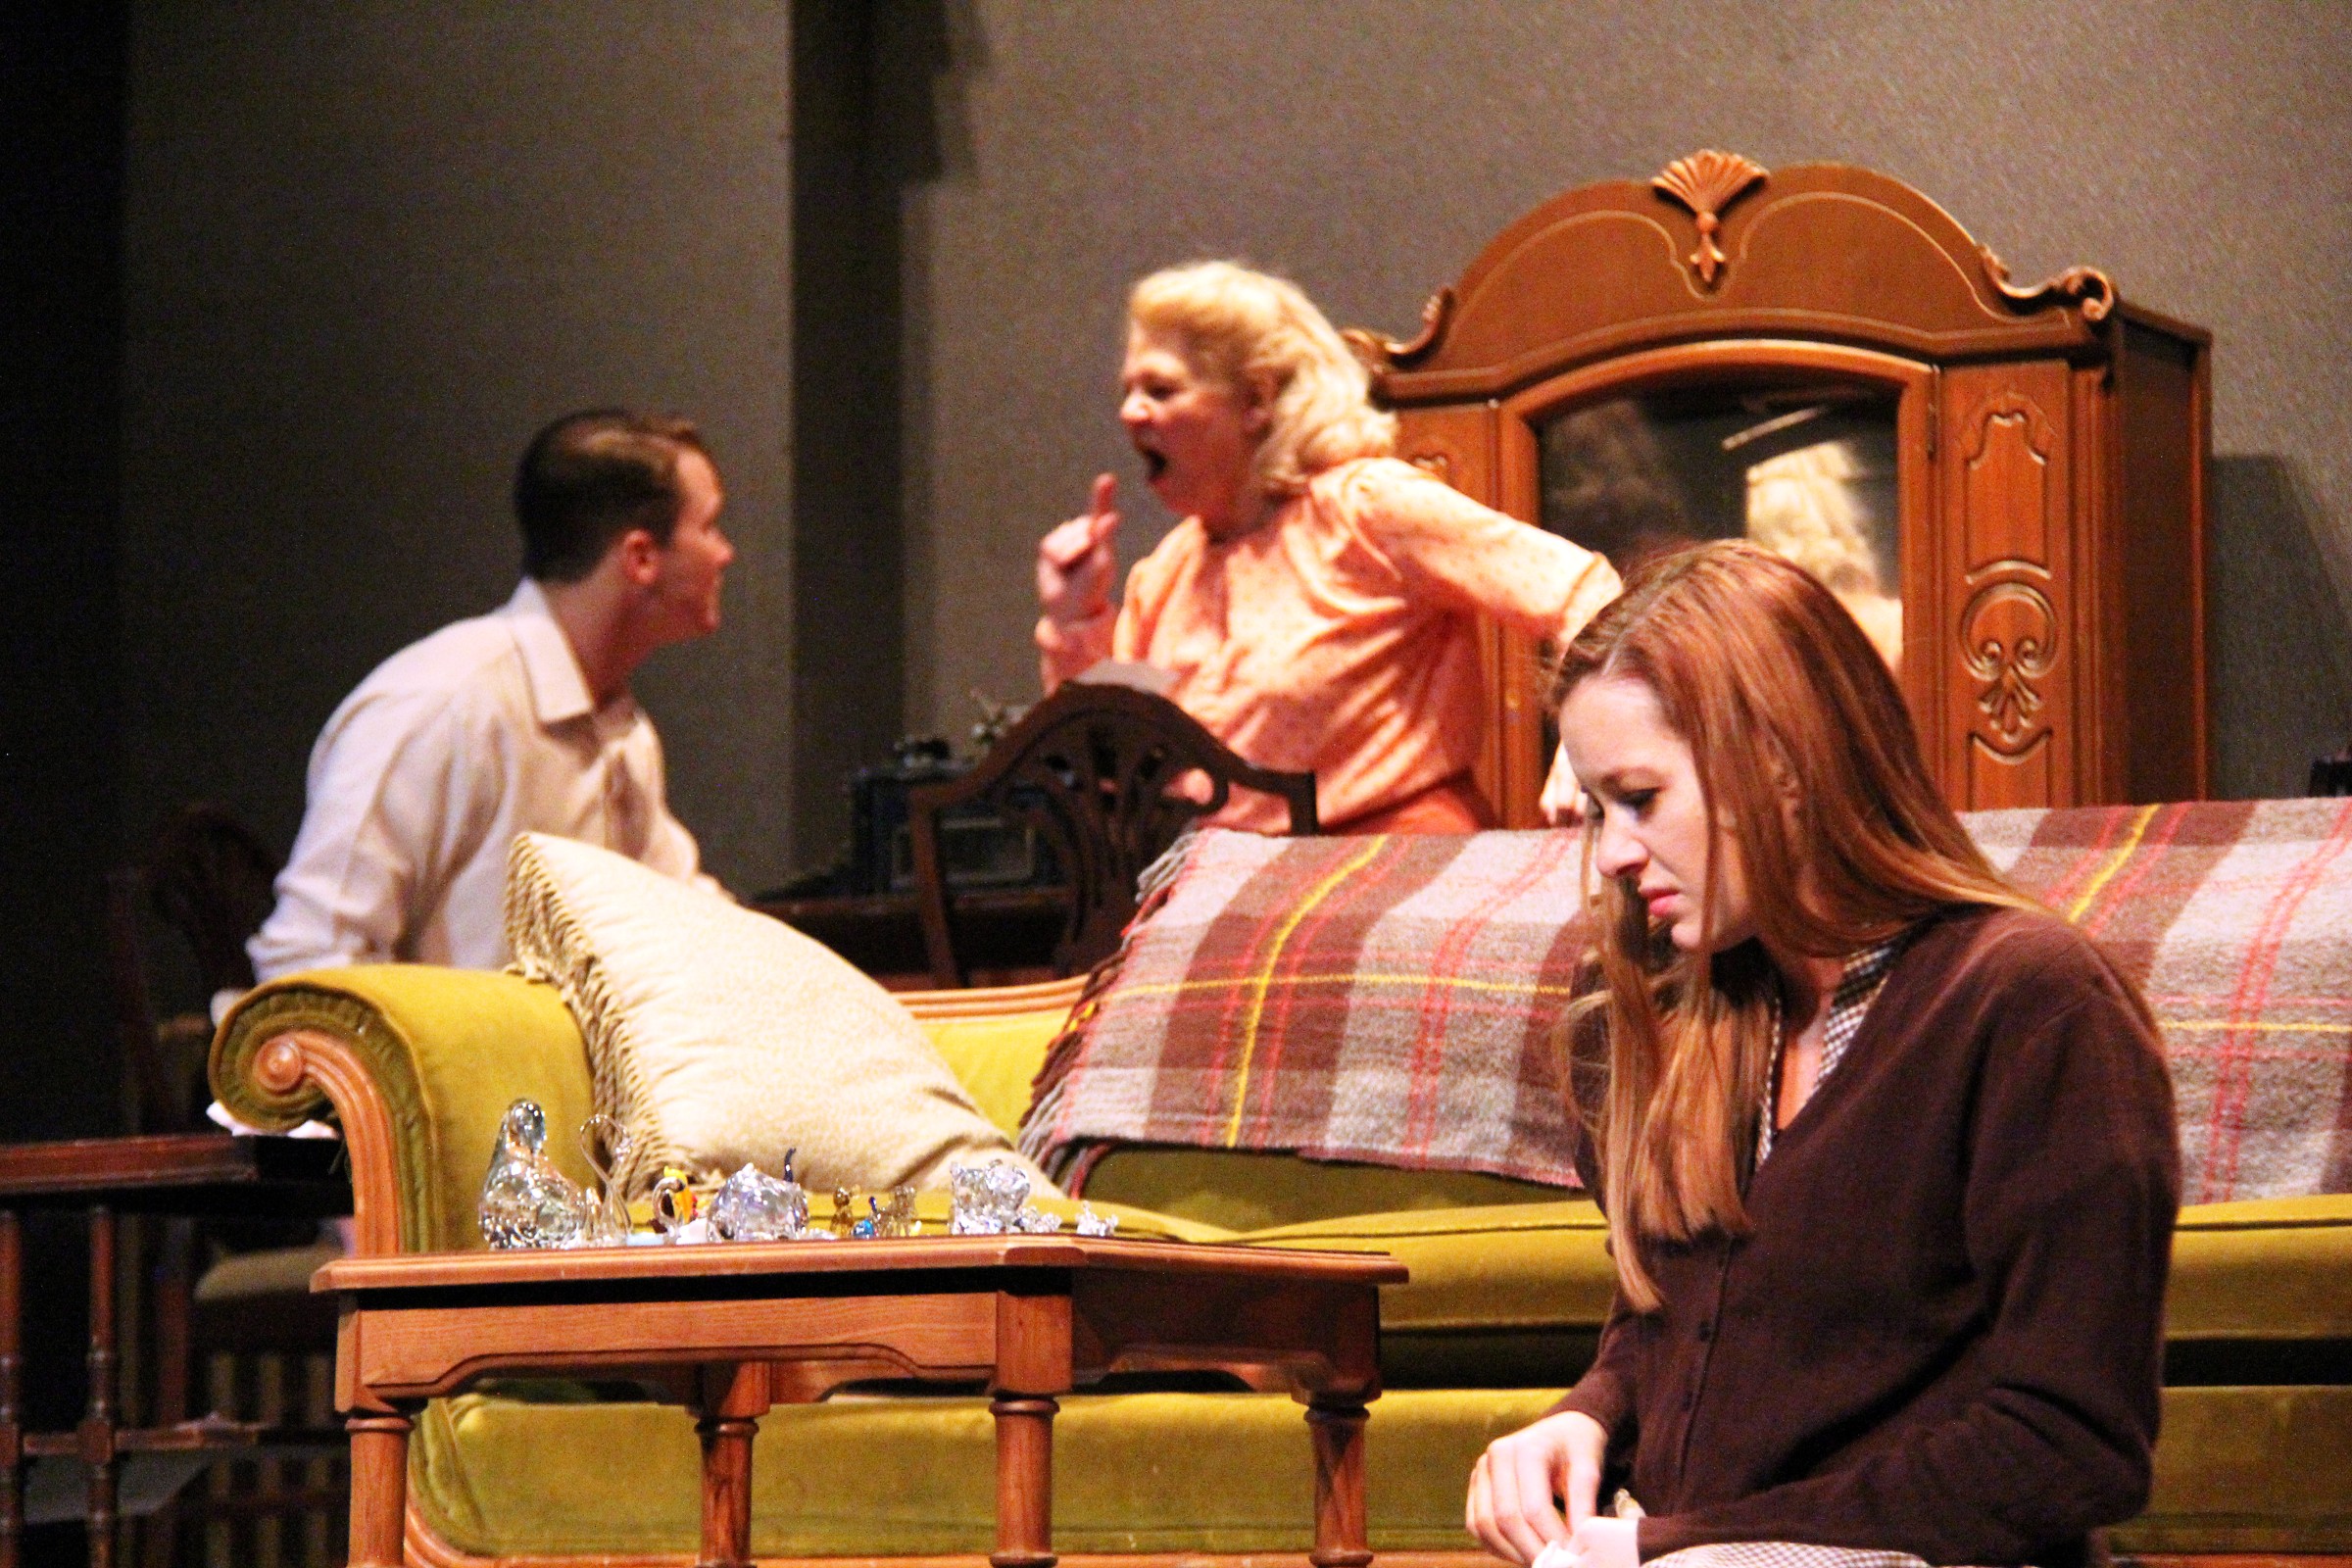 Family and memory among themes of ‘Glass Menagerie’ at the Croswell